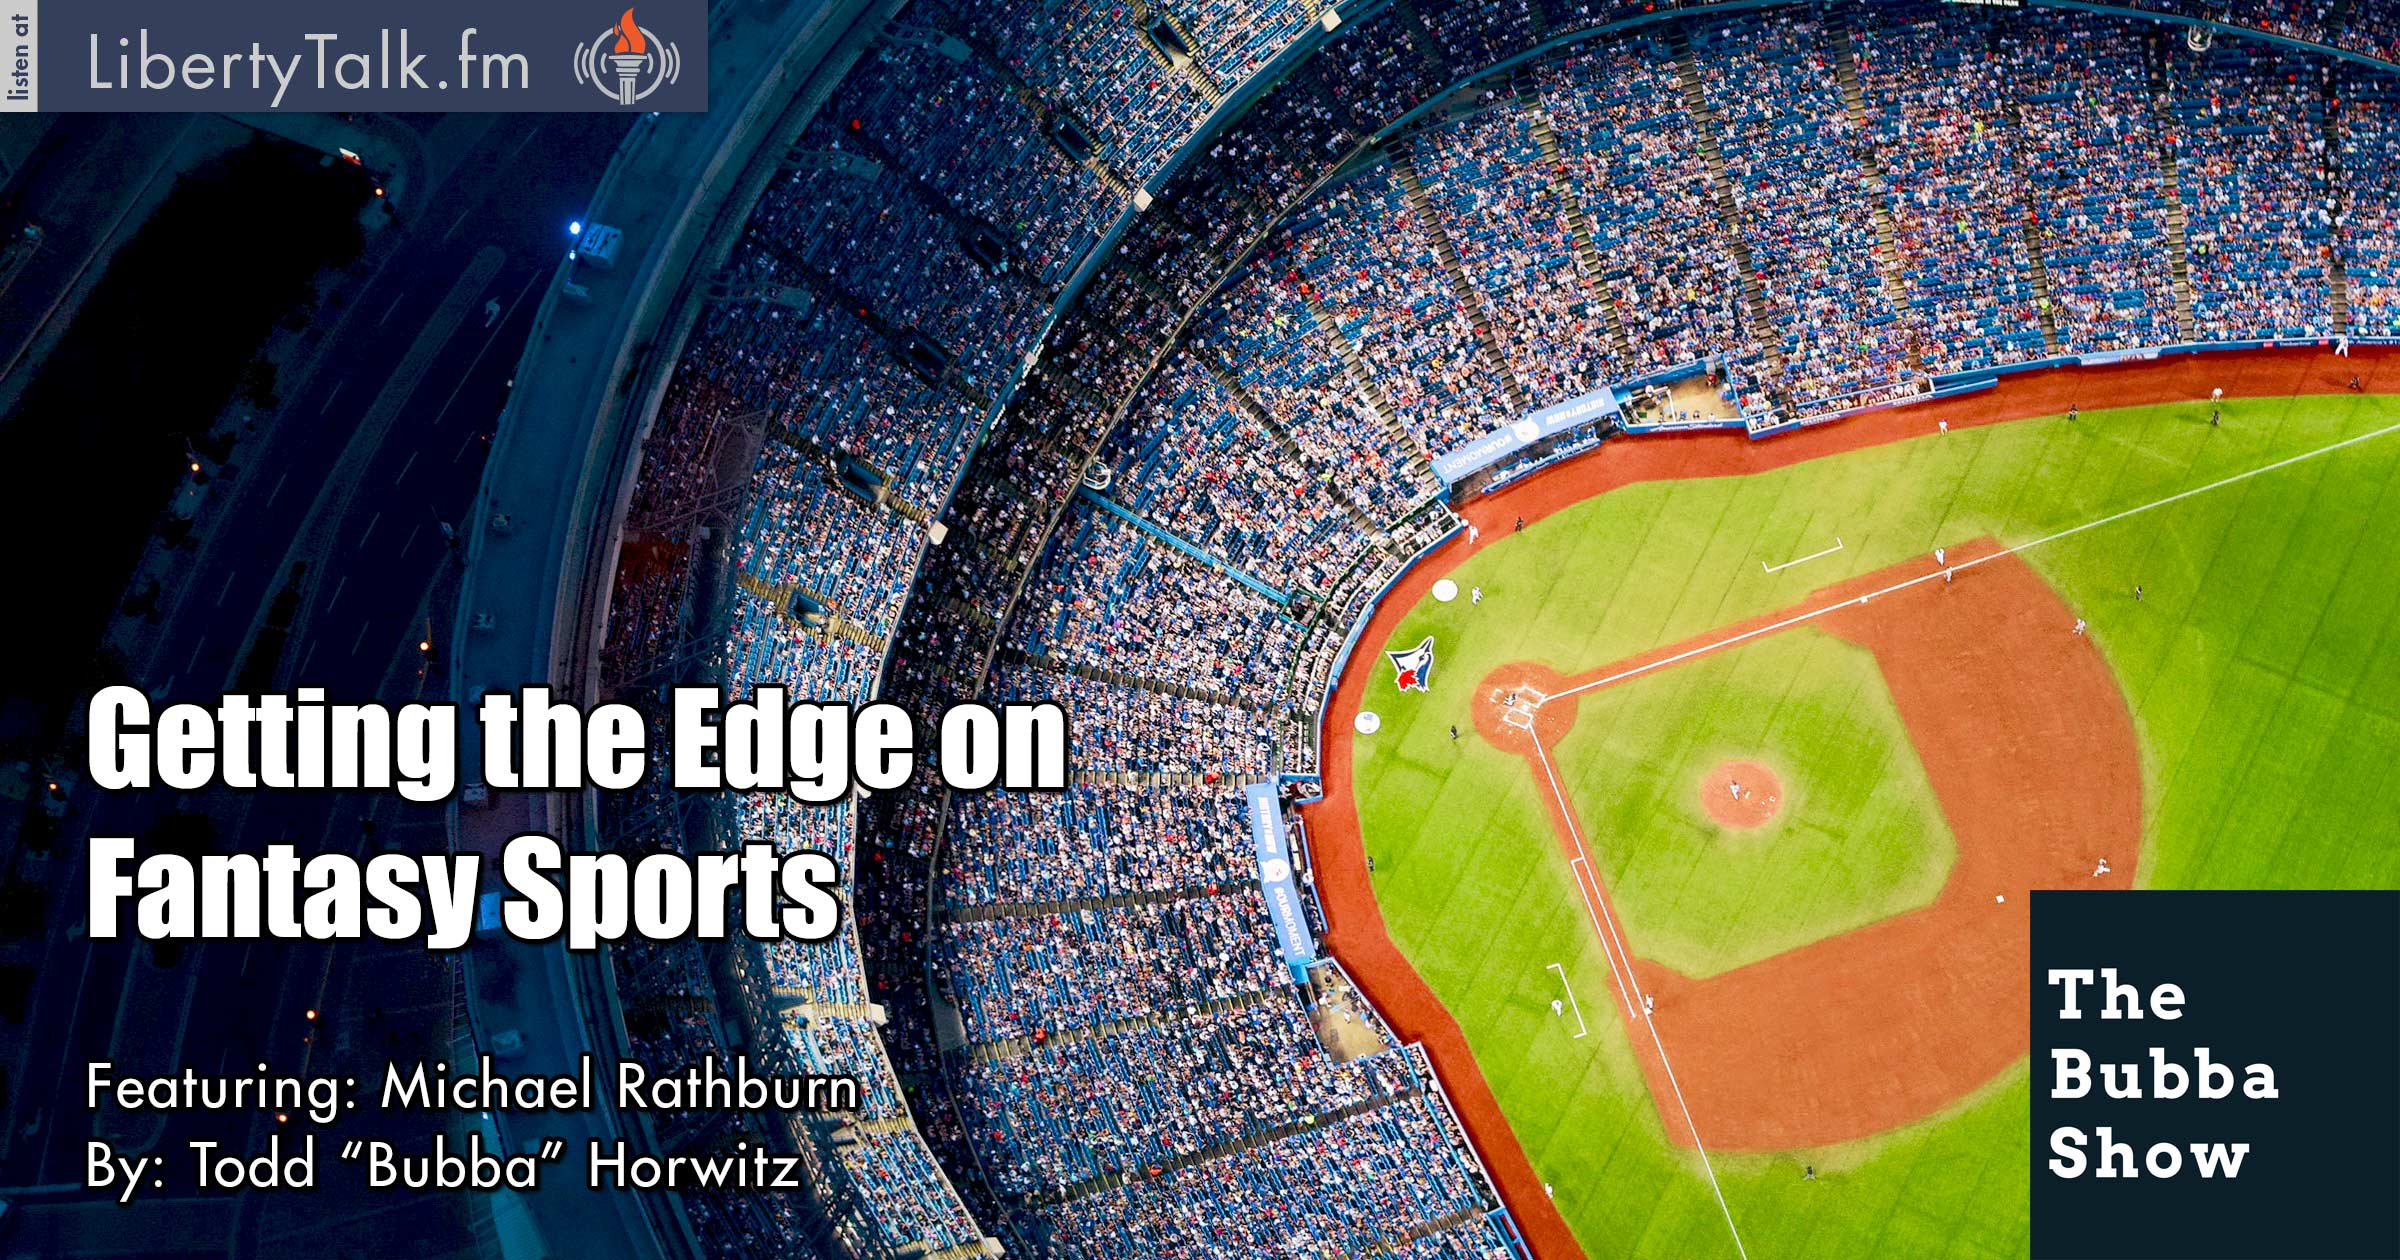 Getting the Edge on Fantasy Sports - The Bubba Show